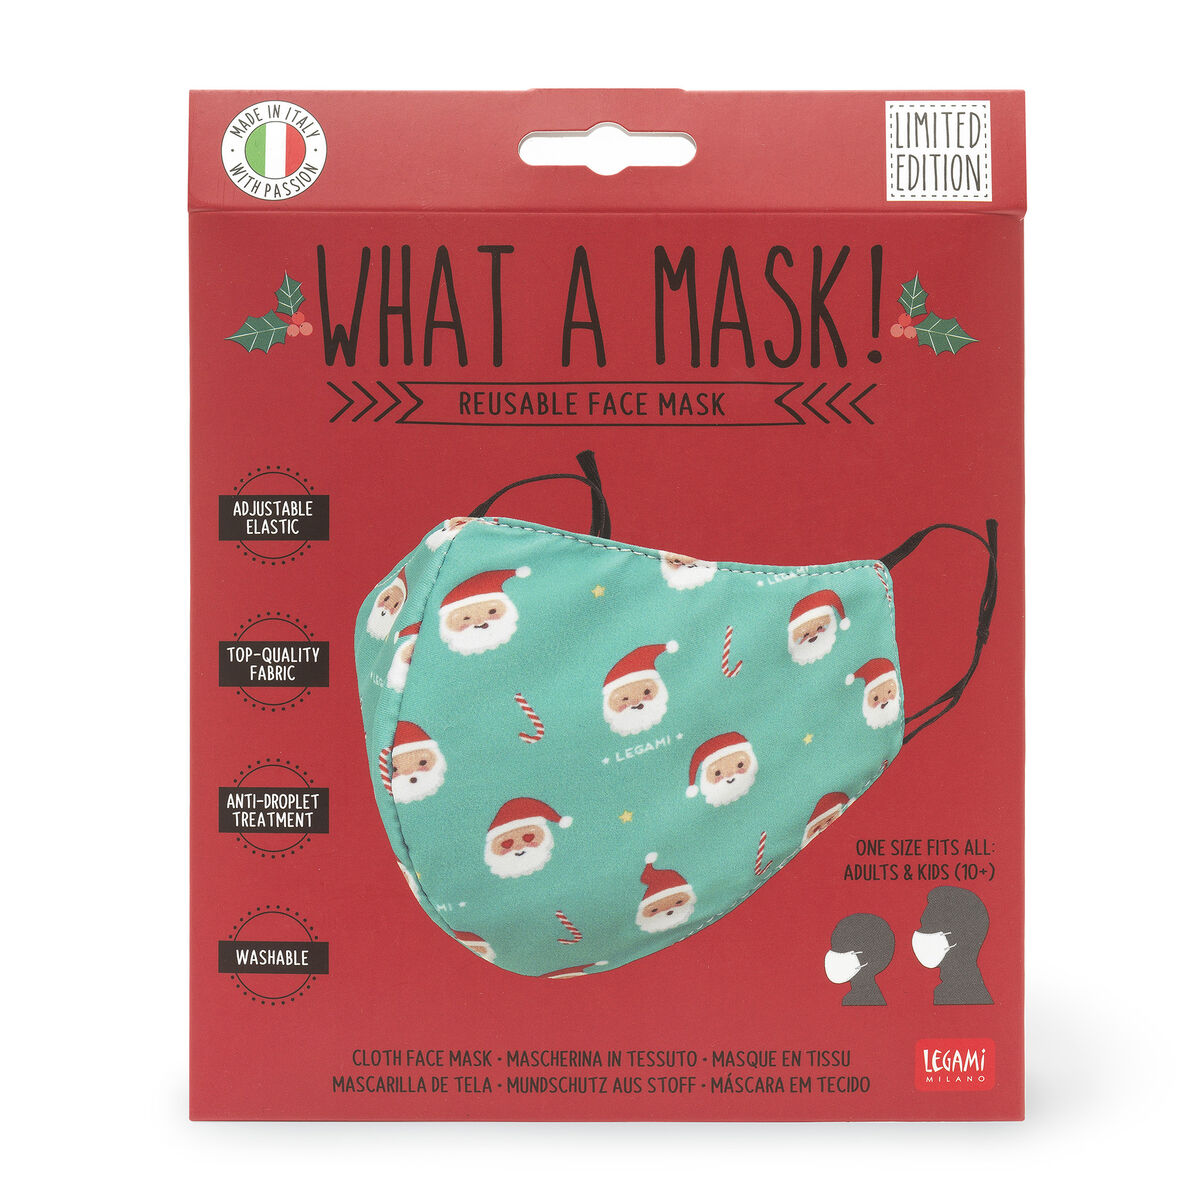 WHAT A MASK! FACE MASK SANTA EMOTICON - LIMITED XMAS EDITION